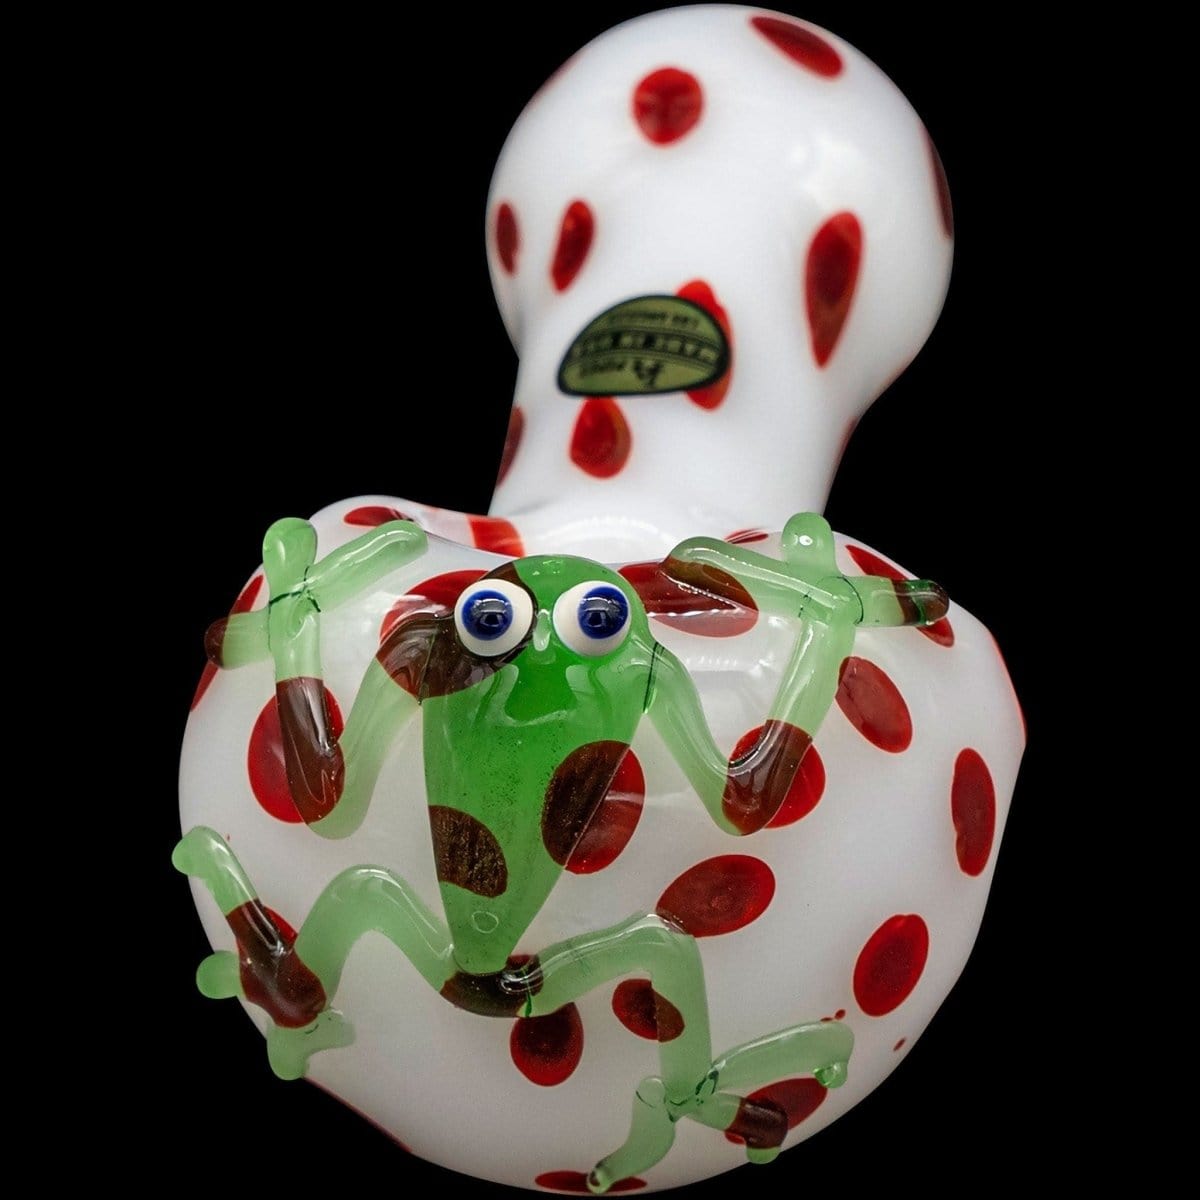 LA Pipes Hand Pipe "Spotted Poison Frog" Spoon Glass Pipe